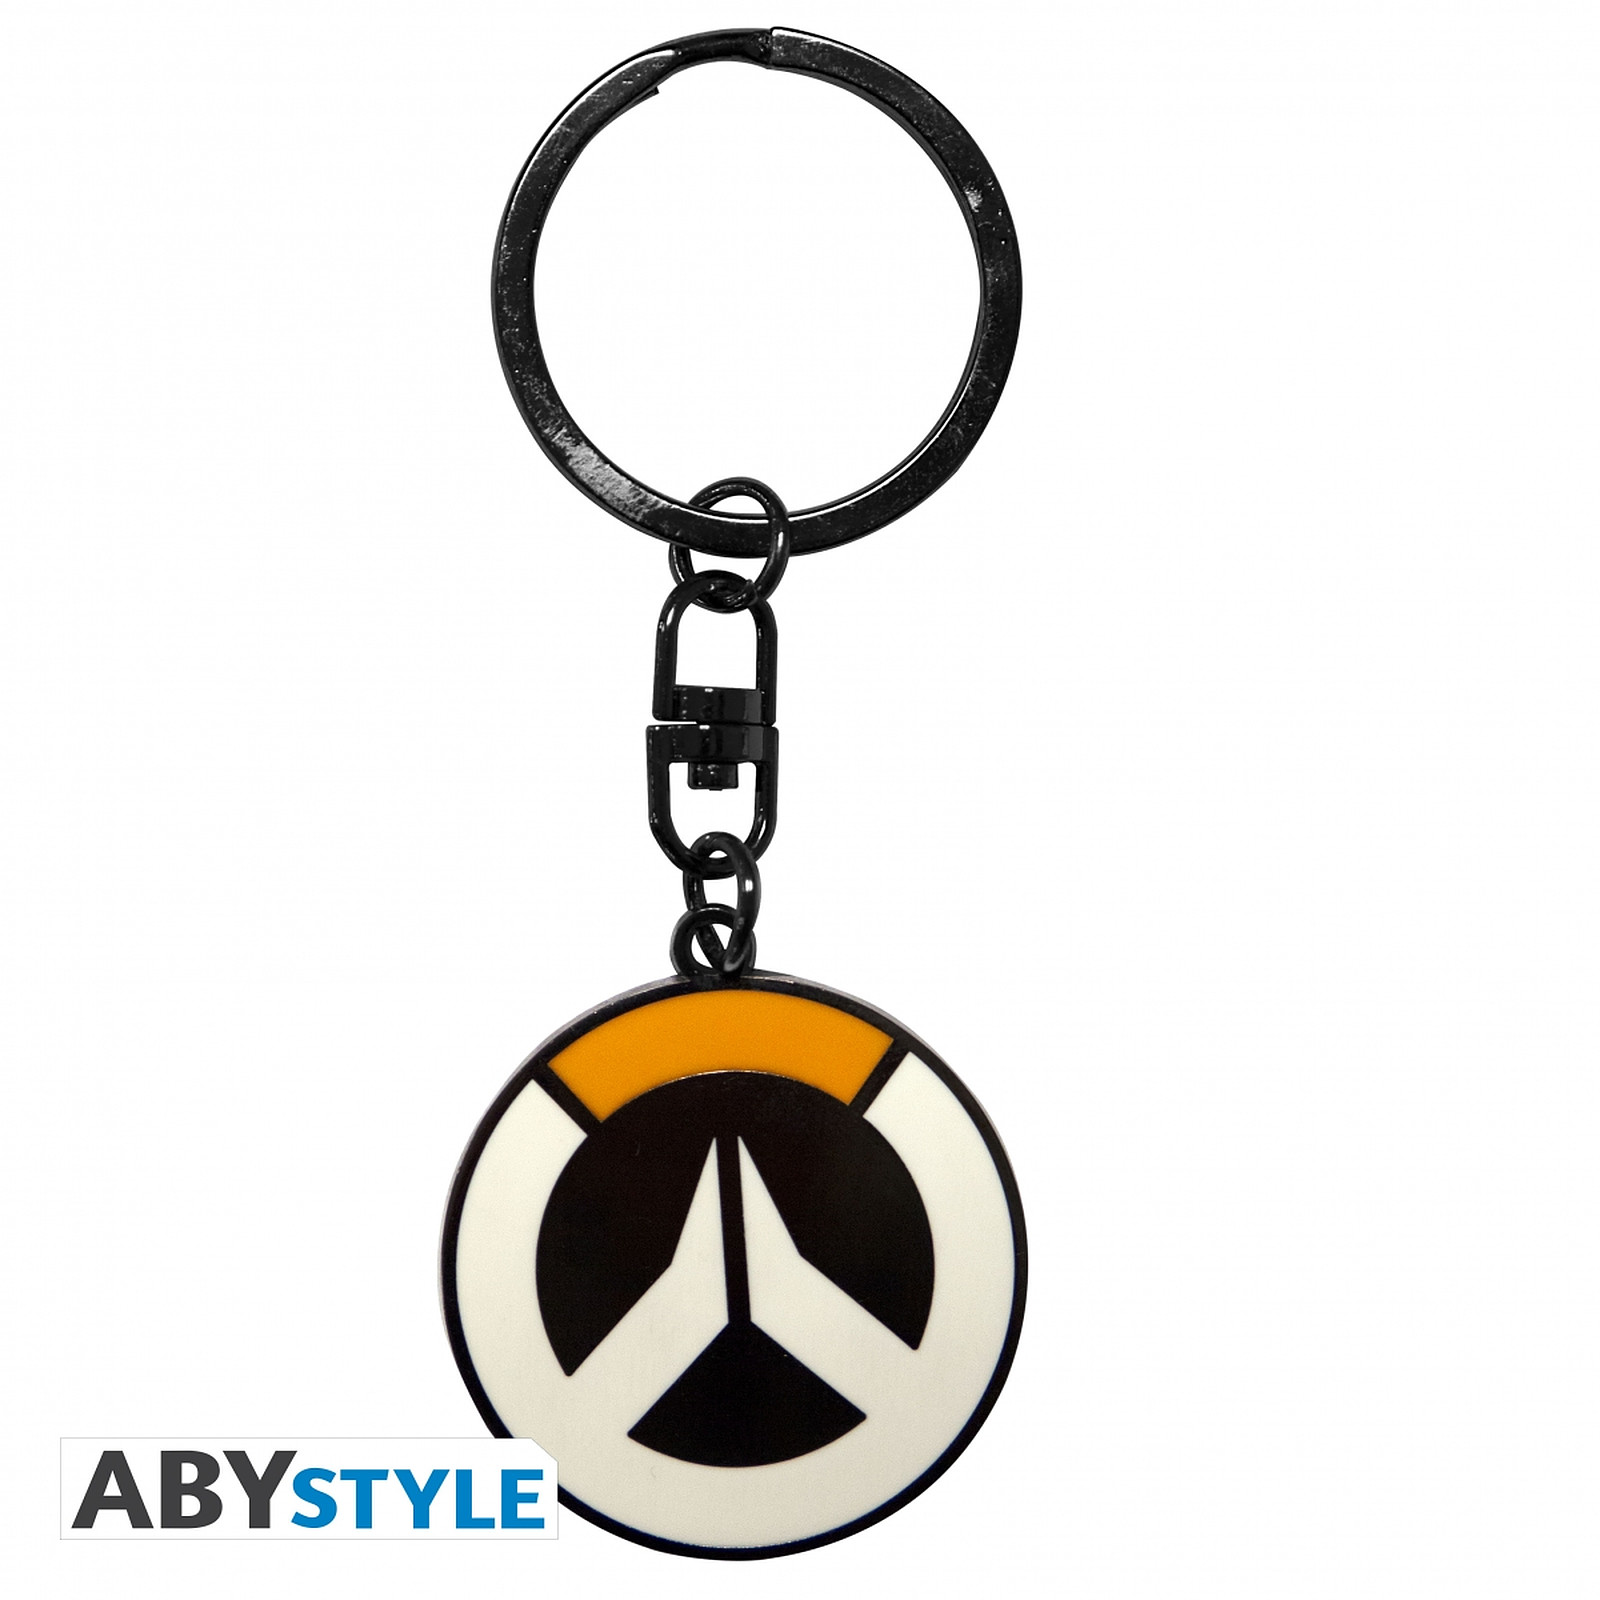 Overwatch - Porte-cles Logo - Porte-cles Abystyle